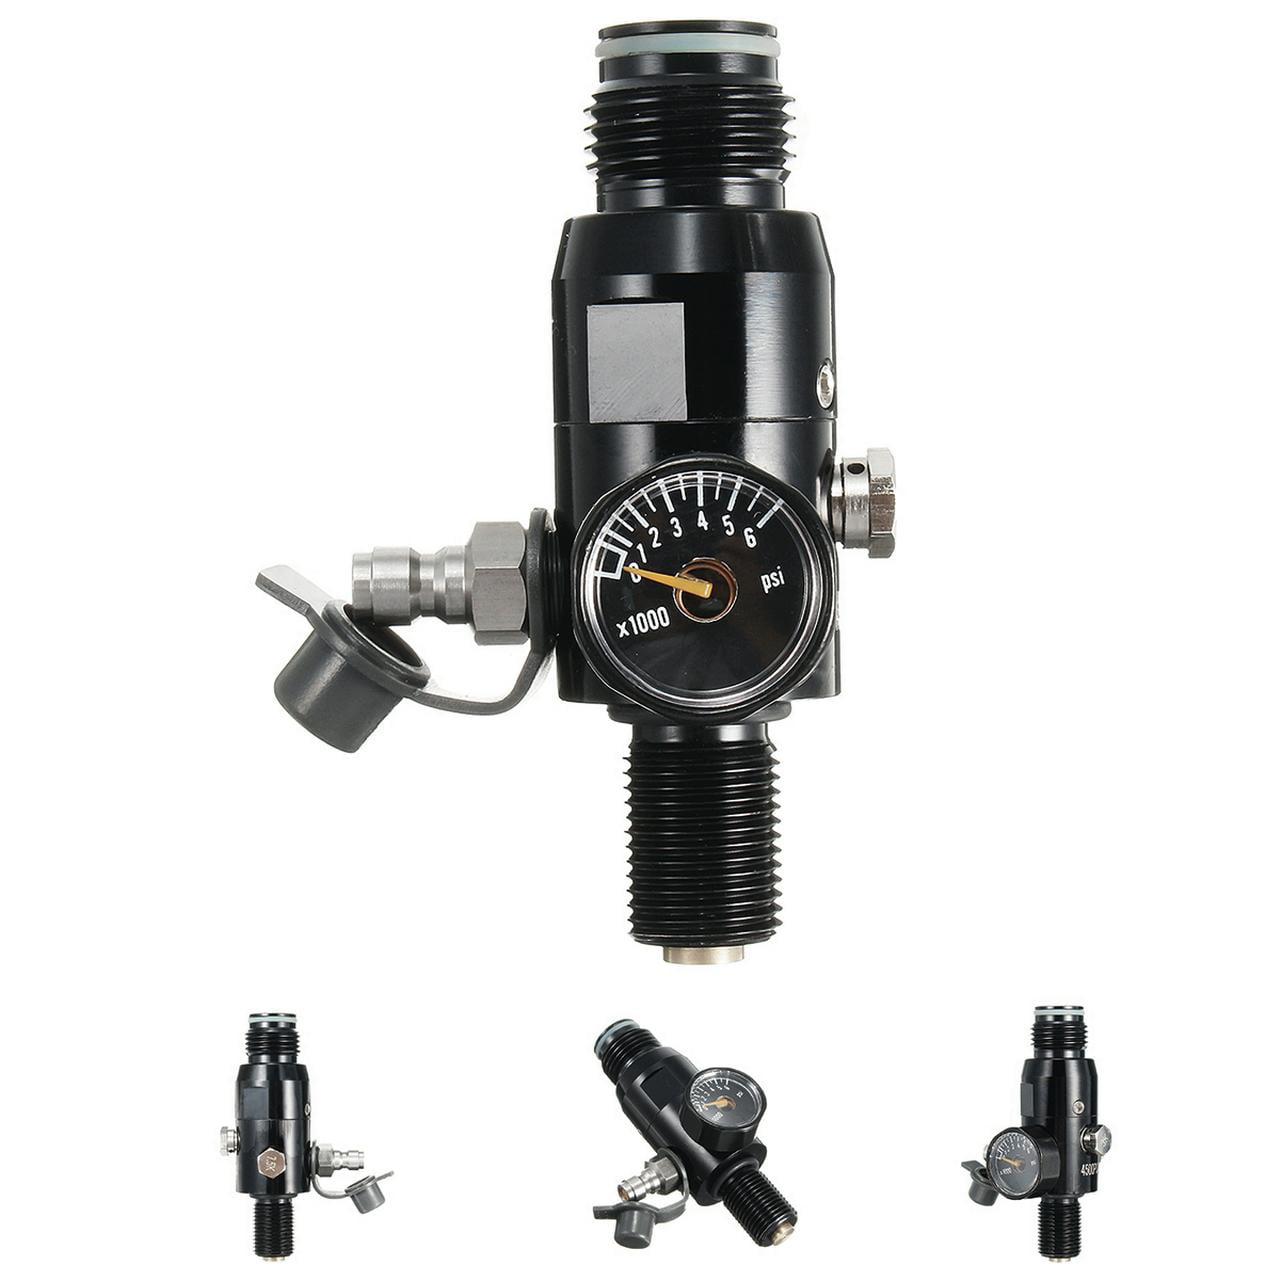 Paintball 4500psi High Compressed Air Tank Regulator HPA Valve Output Tool ！ 